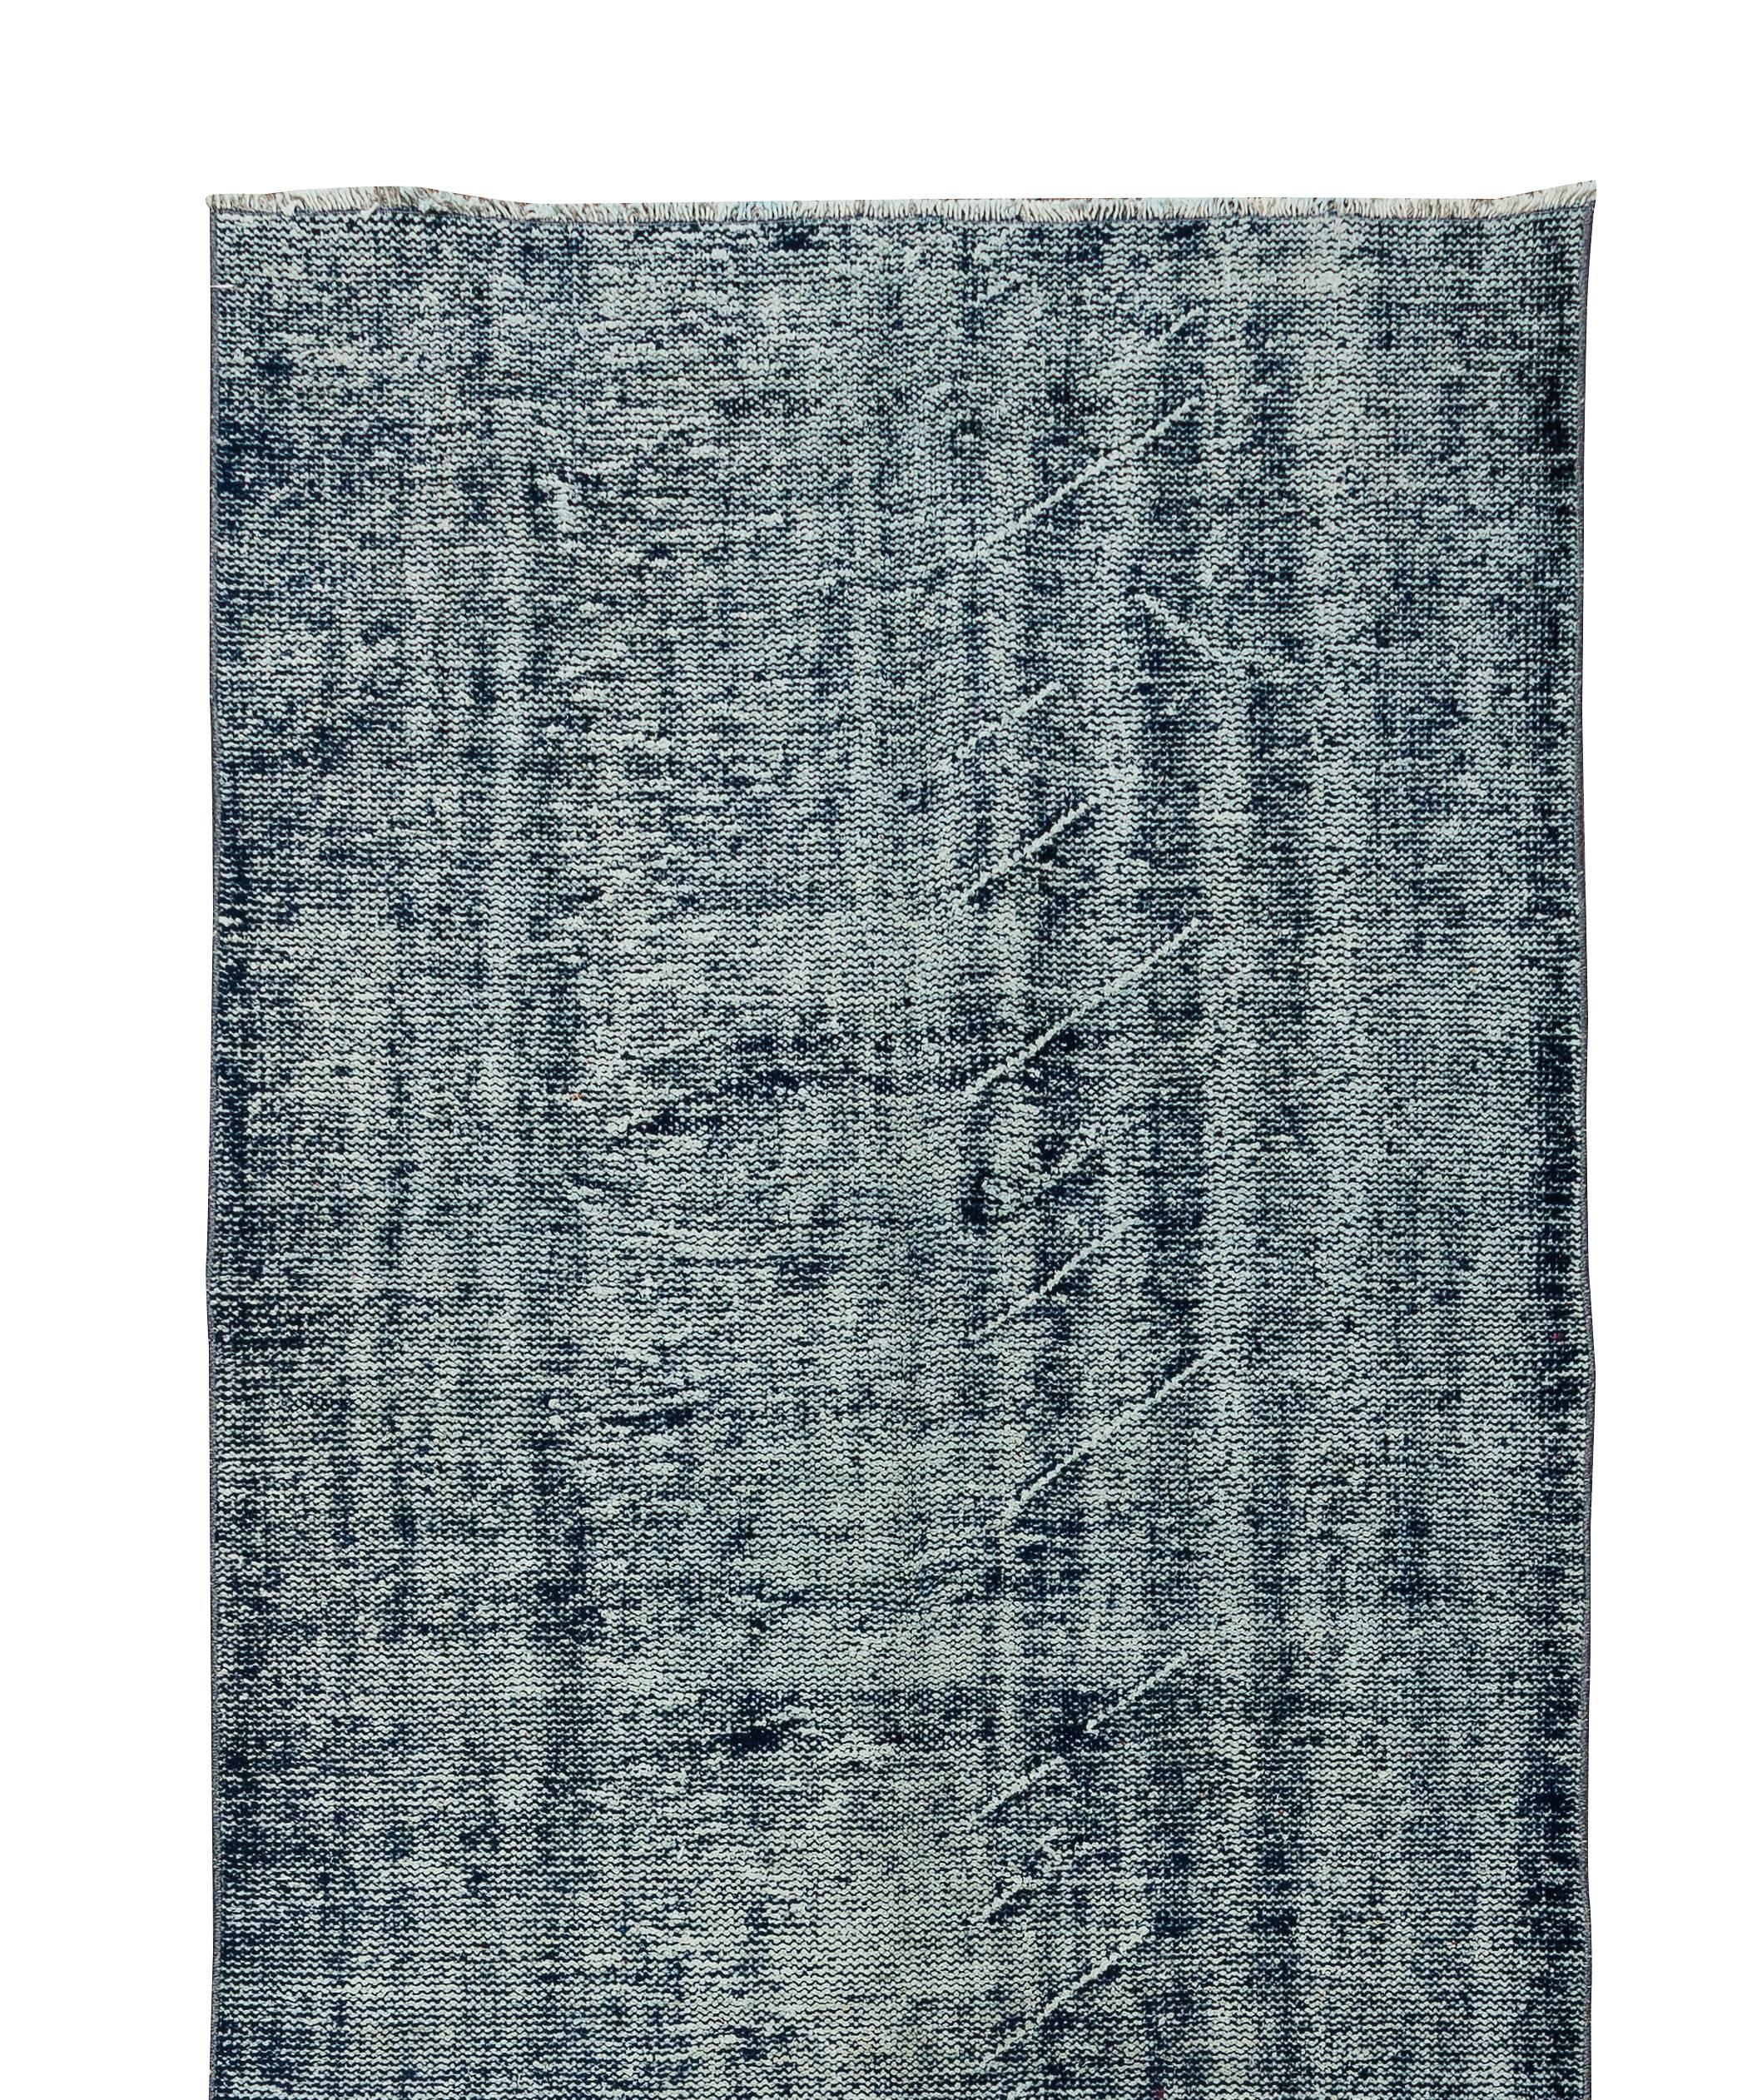 Hand-Knotted 4.2x11.4 Ft Distressed Vintage Handmade Turkish Runner Rug in Navy Blue Colors For Sale